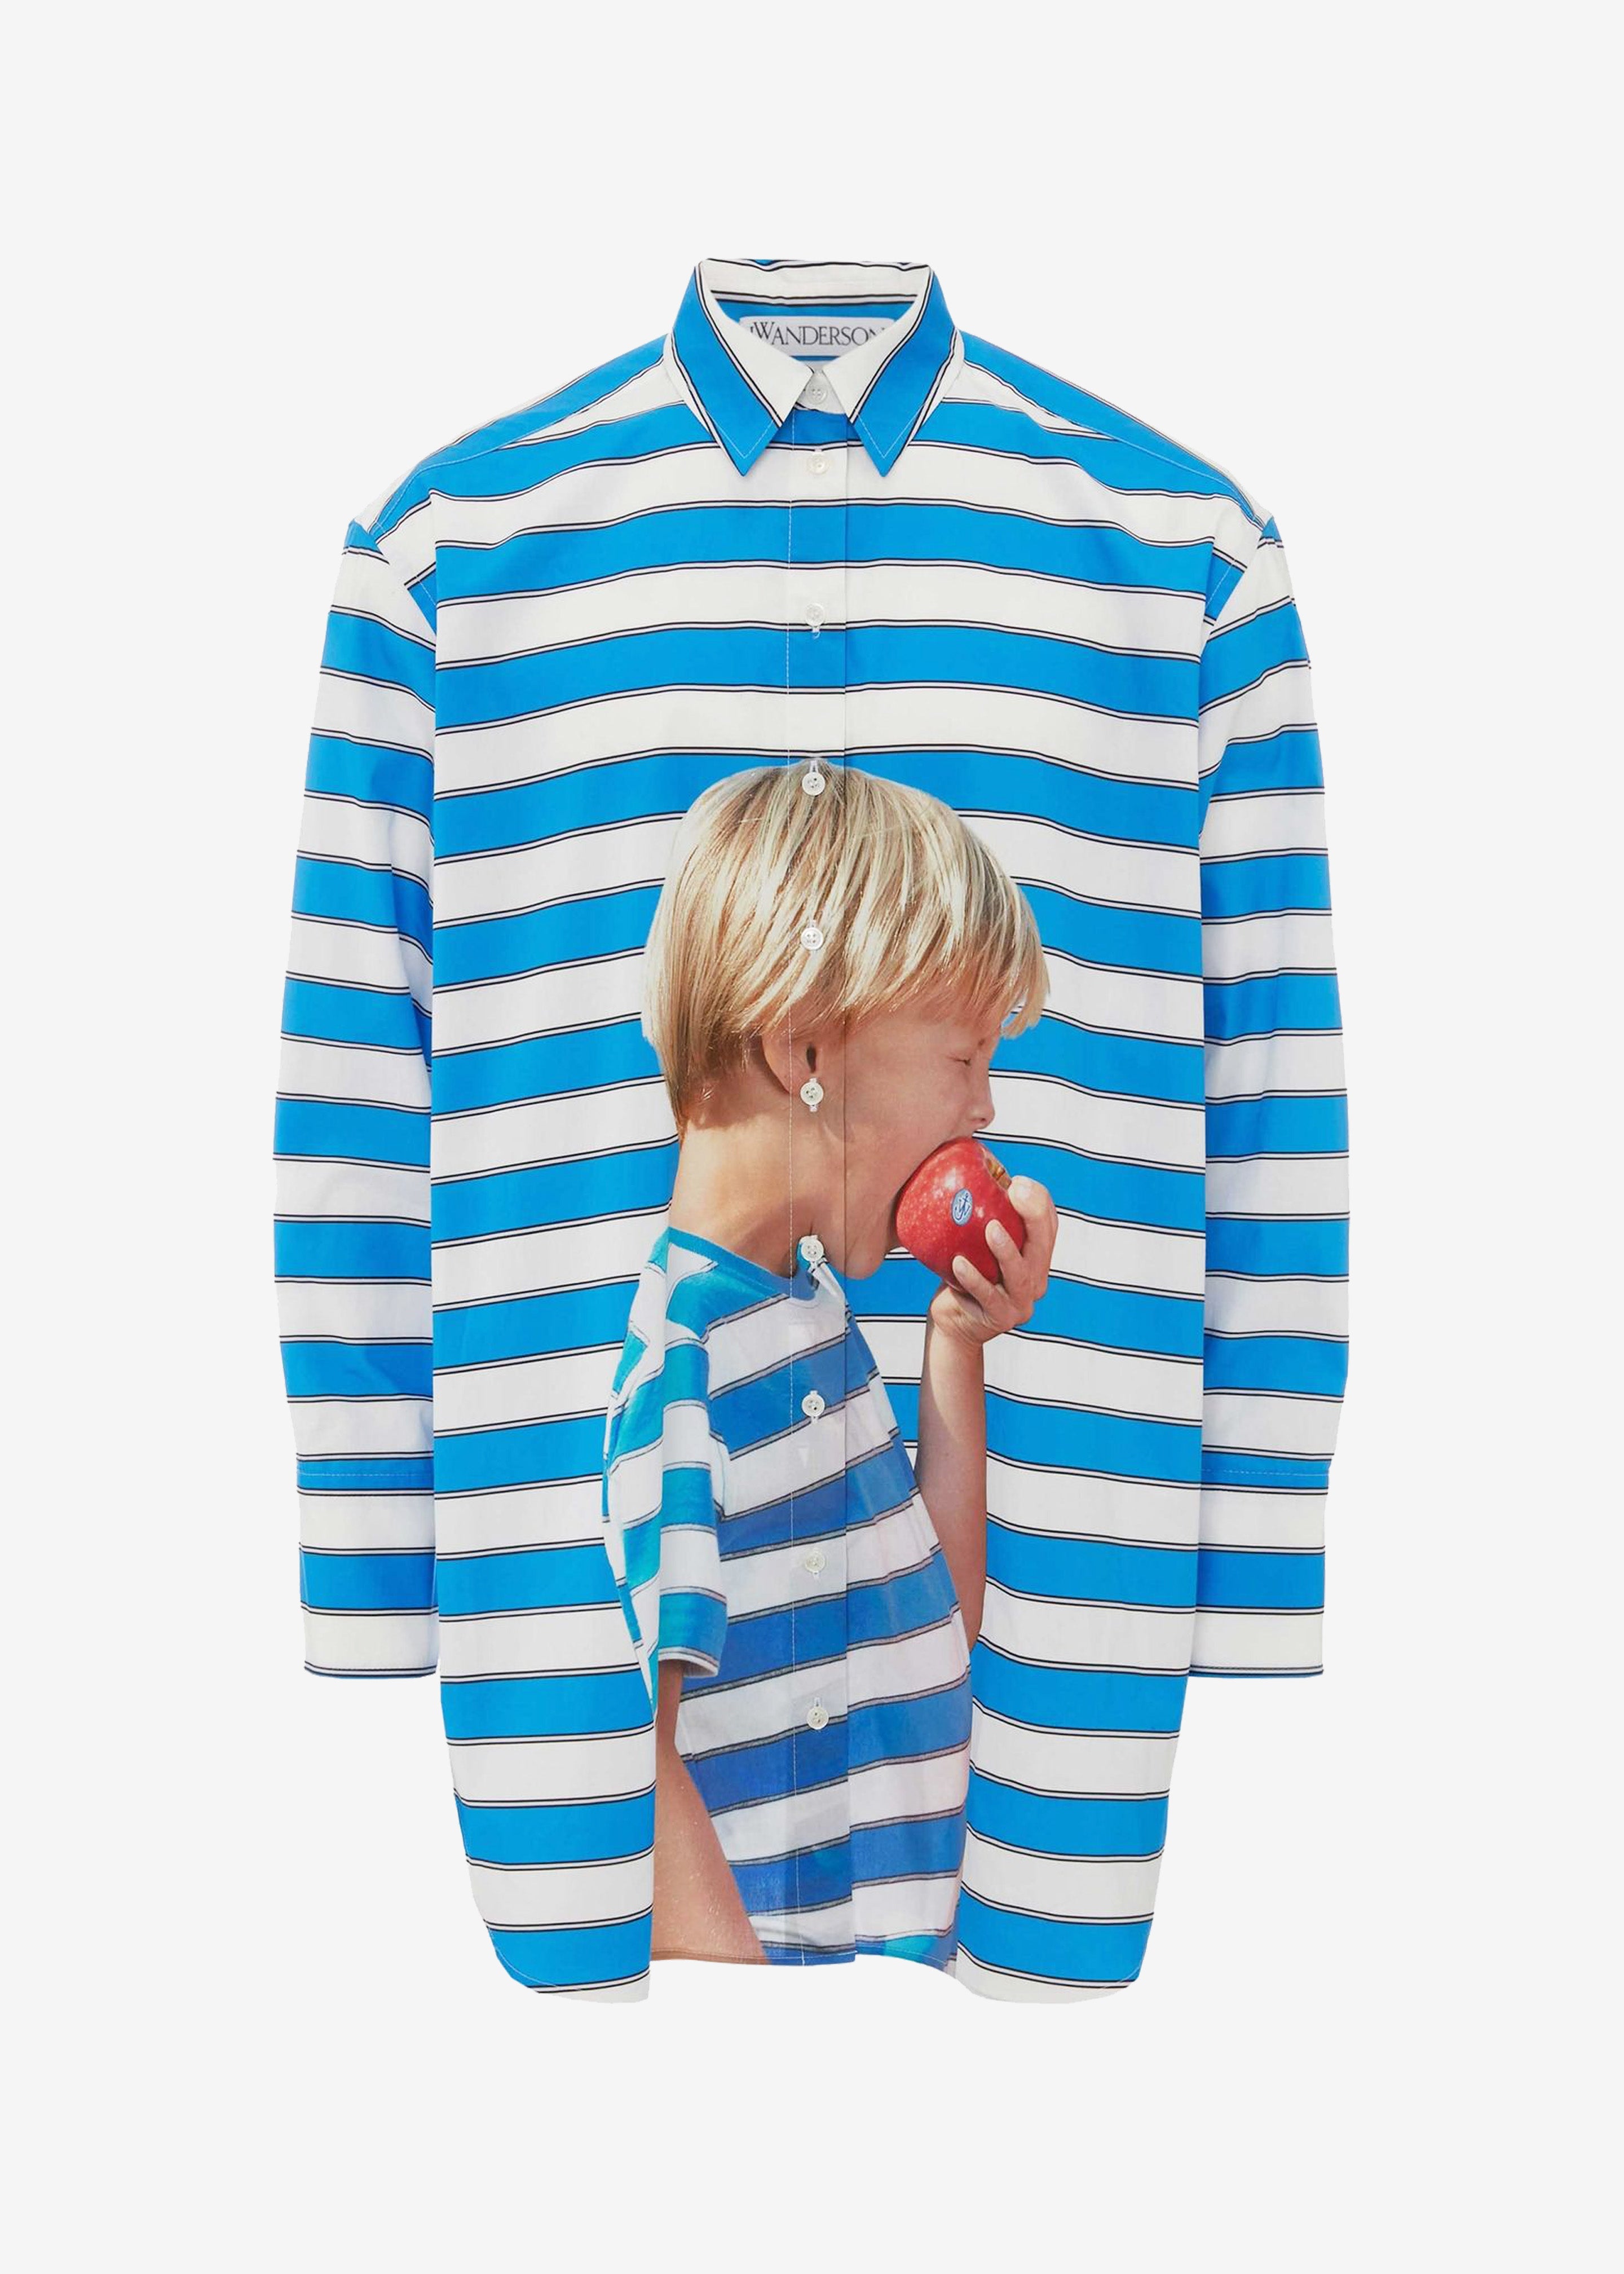 JW Anderson Boy with Apple Oversized Shirt - Blue/White - 5